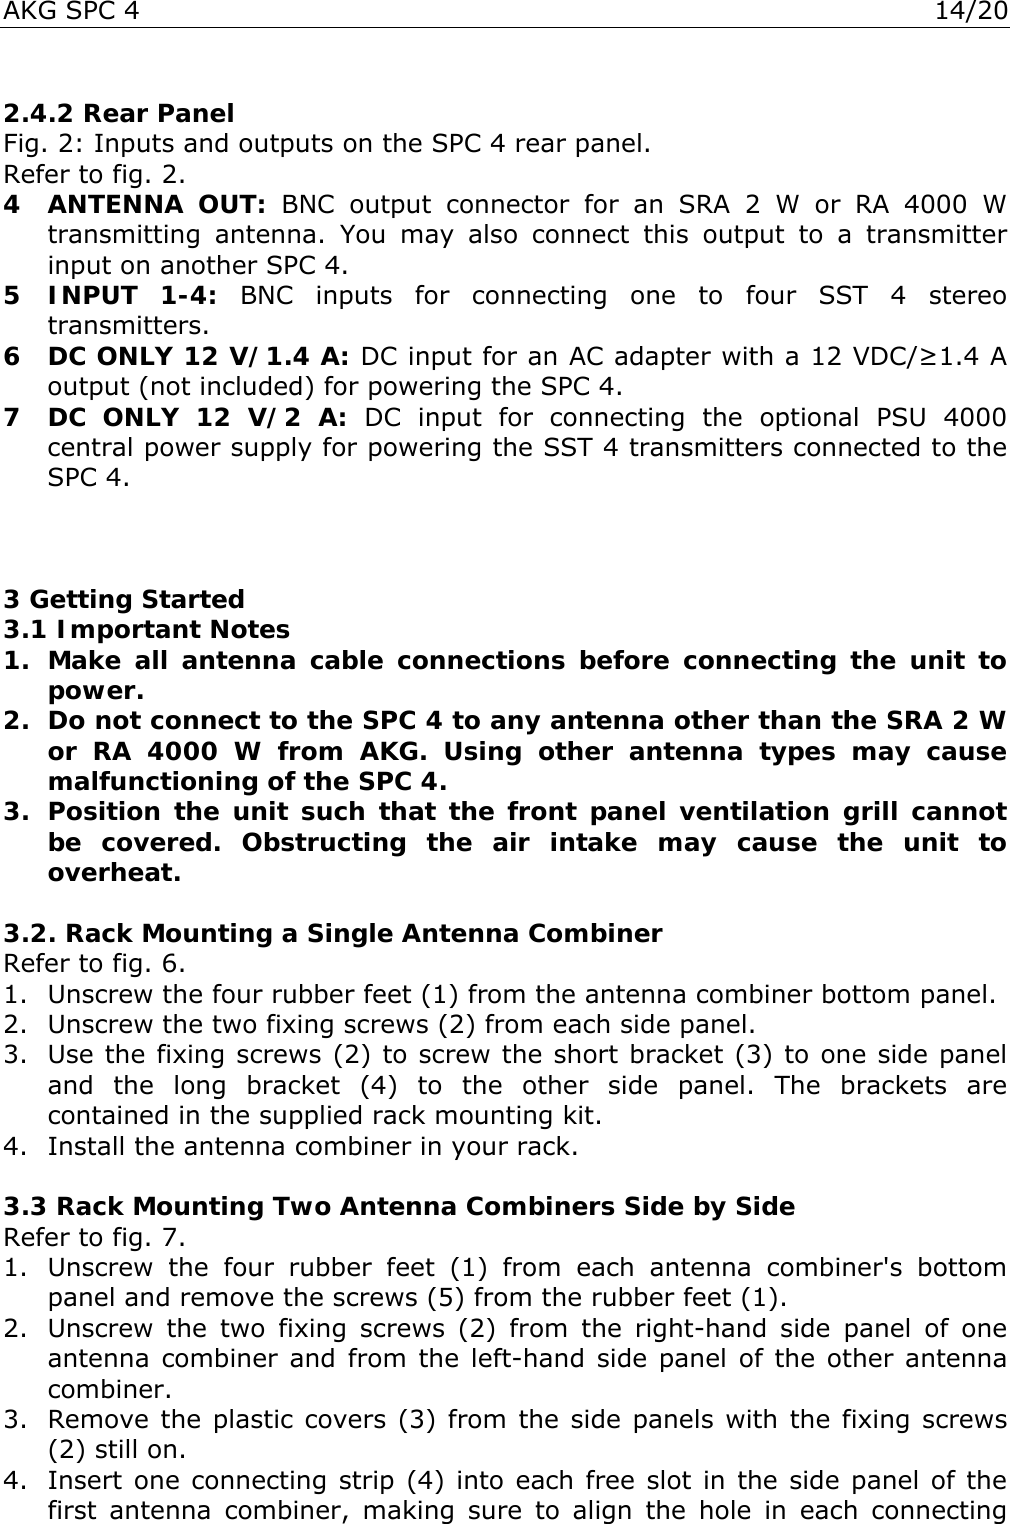 AKG SPC 4  14/20  2.4.2 Rear Panel Fig. 2: Inputs and outputs on the SPC 4 rear panel. Refer to fig. 2. 4 ANTENNA OUT: BNC output connector for an SRA 2 W or RA 4000 W transmitting antenna. You may also connect this output to a transmitter input on another SPC 4. 5 INPUT 1-4: BNC inputs for connecting one to four SST 4 stereo transmitters. 6  DC ONLY 12 V/1.4 A: DC input for an AC adapter with a 12 VDC/≥1.4 A output (not included) for powering the SPC 4. 7  DC ONLY 12 V/2 A: DC input for connecting the optional PSU 4000 central power supply for powering the SST 4 transmitters connected to the SPC 4.    3 Getting Started 3.1 Important Notes 1. Make all antenna cable connections before connecting the unit to power. 2.  Do not connect to the SPC 4 to any antenna other than the SRA 2 W or RA 4000 W from AKG. Using other antenna types may cause malfunctioning of the SPC 4. 3. Position the unit such that the front panel ventilation grill cannot be covered. Obstructing the air intake may cause the unit to overheat.  3.2. Rack Mounting a Single Antenna Combiner Refer to fig. 6. 1.  Unscrew the four rubber feet (1) from the antenna combiner bottom panel. 2.  Unscrew the two fixing screws (2) from each side panel. 3.  Use the fixing screws (2) to screw the short bracket (3) to one side panel and the long bracket (4) to the other side panel. The brackets are contained in the supplied rack mounting kit. 4.  Install the antenna combiner in your rack.  3.3 Rack Mounting Two Antenna Combiners Side by Side Refer to fig. 7. 1.  Unscrew the four rubber feet (1) from each antenna combiner&apos;s bottom panel and remove the screws (5) from the rubber feet (1). 2.  Unscrew the two fixing screws (2) from the right-hand side panel of one antenna combiner and from the left-hand side panel of the other antenna combiner. 3.  Remove the plastic covers (3) from the side panels with the fixing screws (2) still on. 4.  Insert one connecting strip (4) into each free slot in the side panel of the first antenna combiner, making sure to align the hole in each connecting 